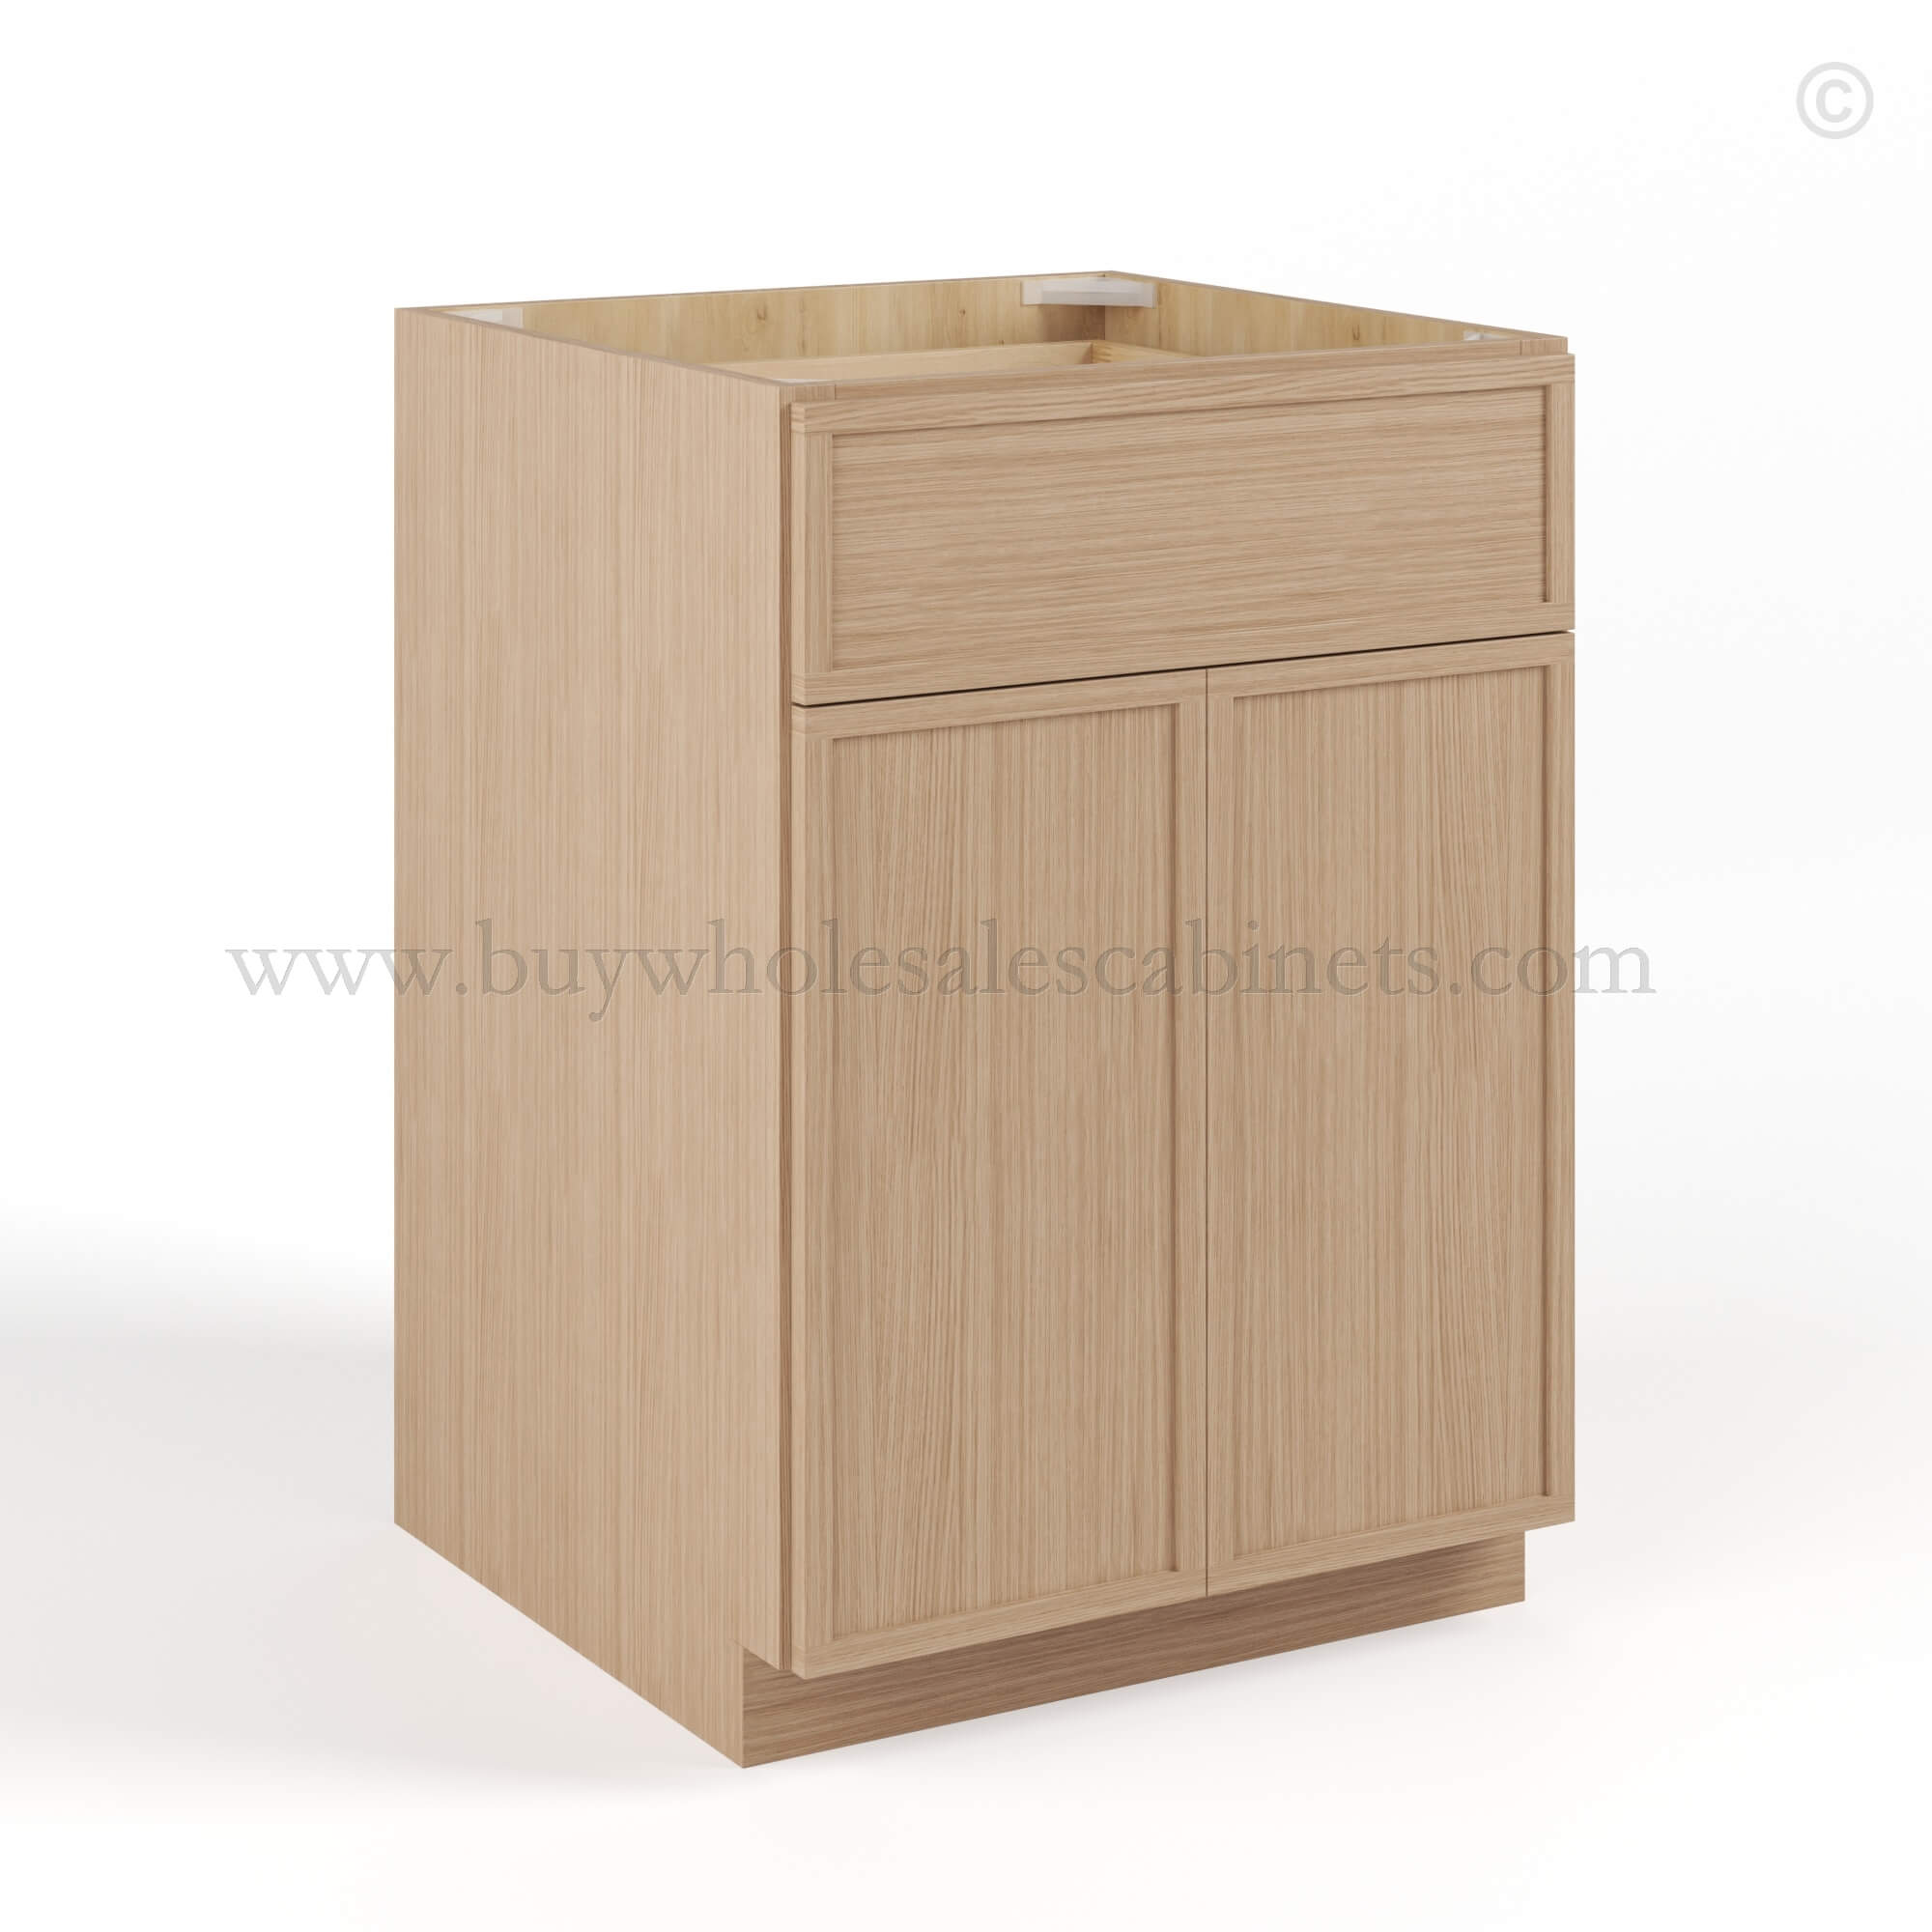 Slim Oak Shaker Base Cabinet Double Door and Single Drawer, rta cabinets, wholesale cabinets